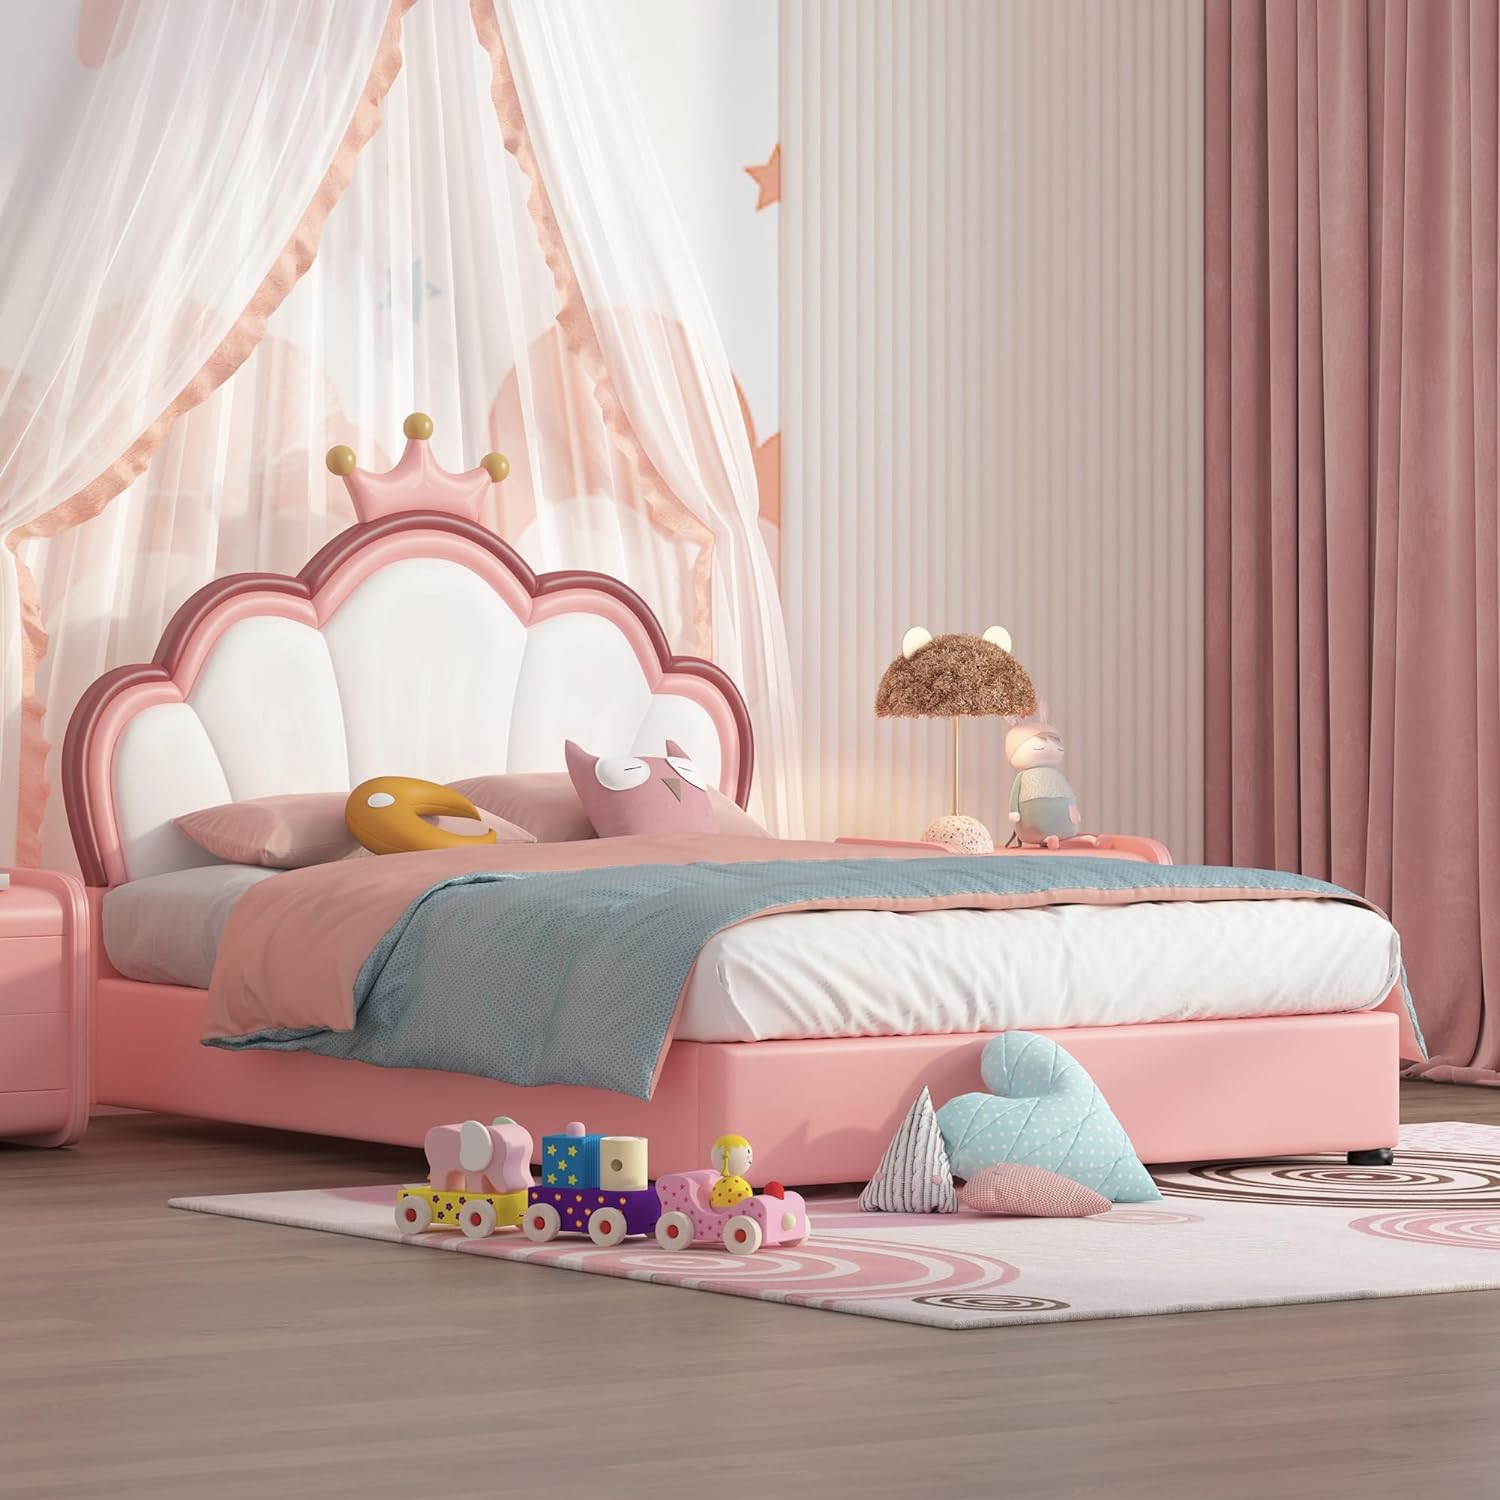 Dayiyang Luxury Twin Bed for Kids